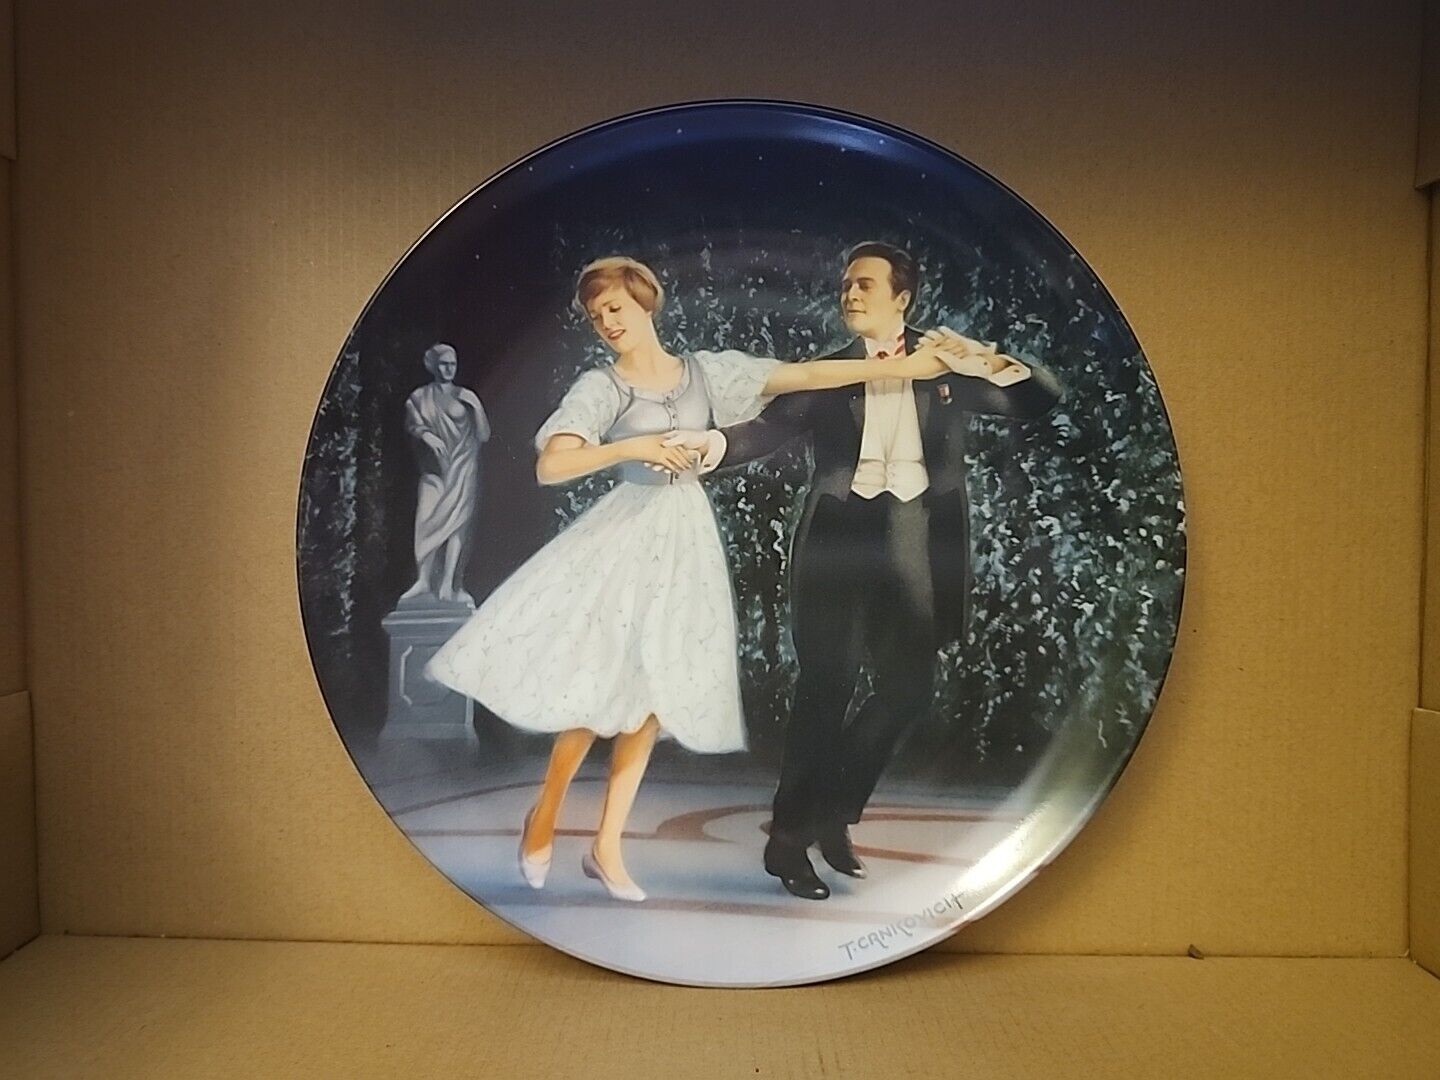 Vintage 1986 The Sound Of Music Collector Plate by Knowles Forth Plate in Series